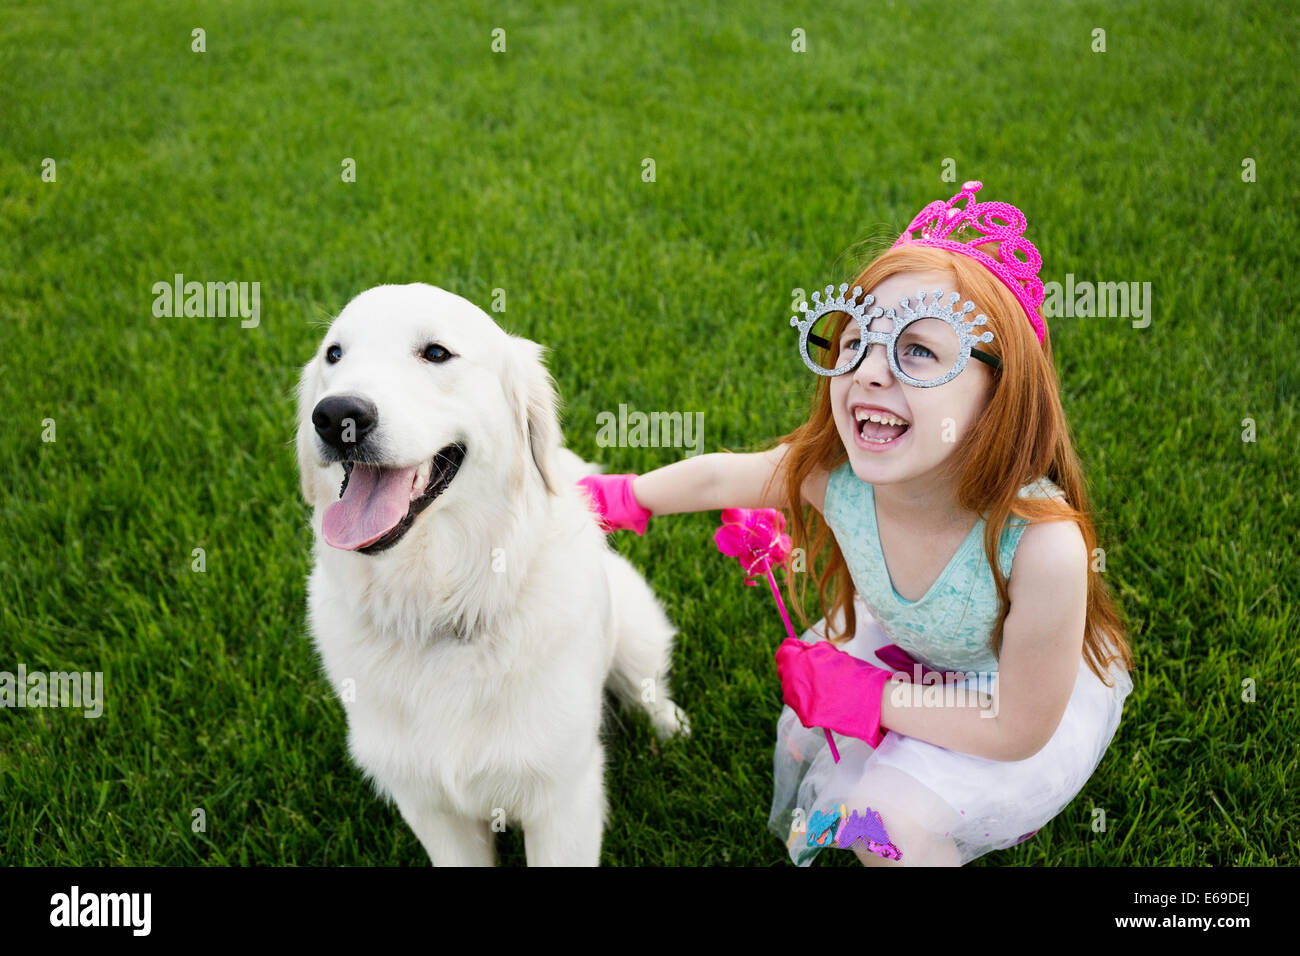 Caucasian girl playing dress up in park Banque D'Images